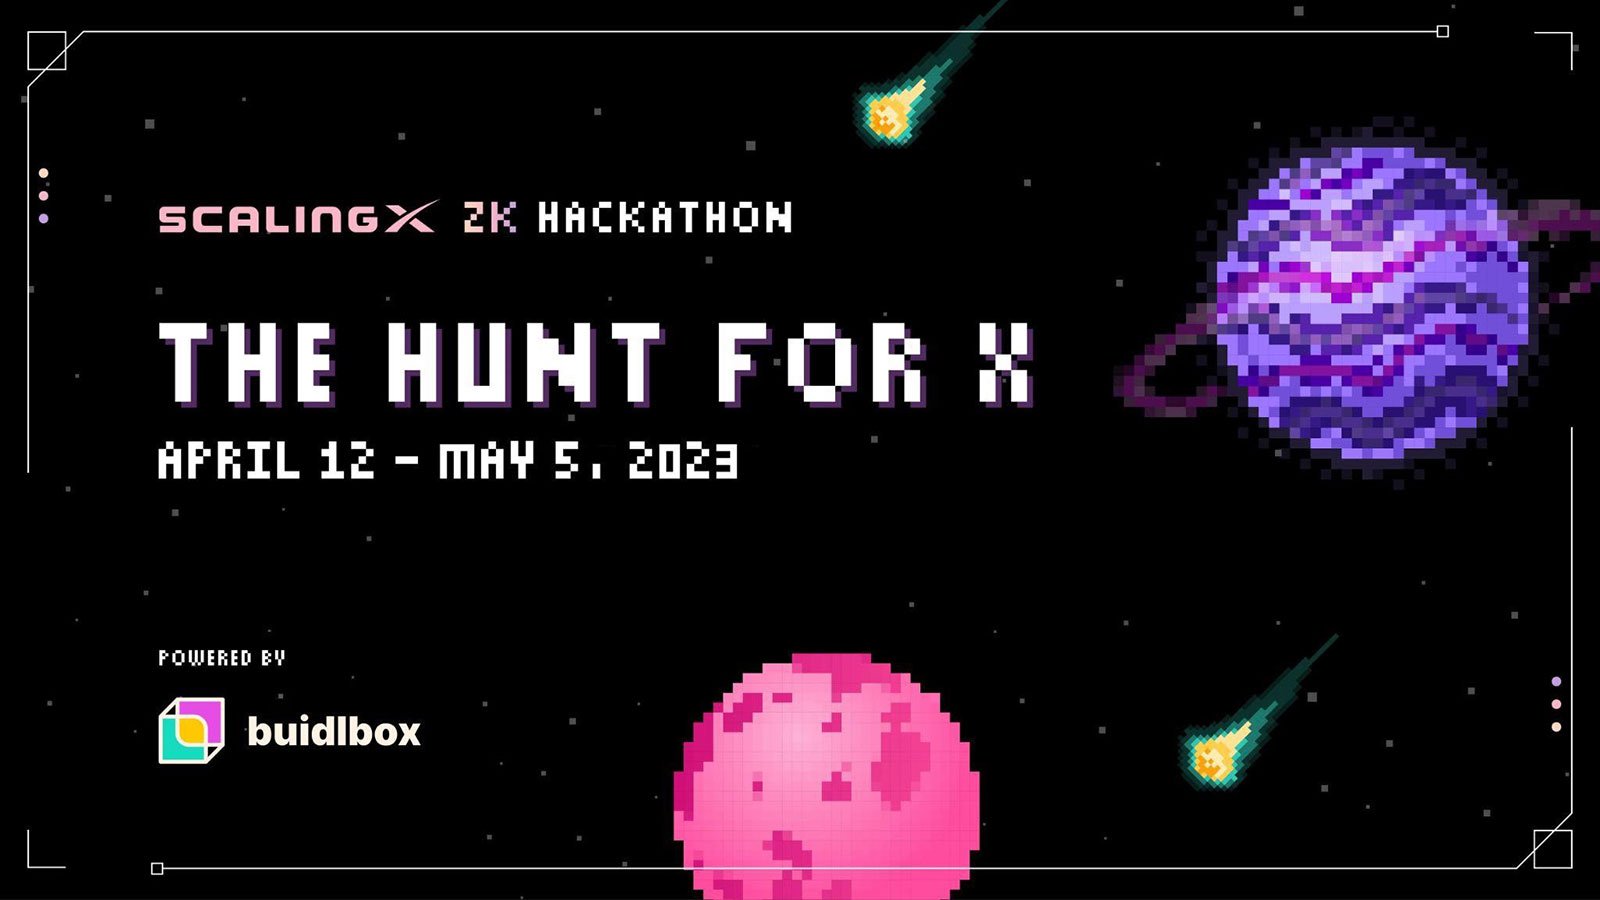 ScalingX and Buidlbox Partner to Host "The Hunt for X" Zero-Knowledge Tech Hackathon